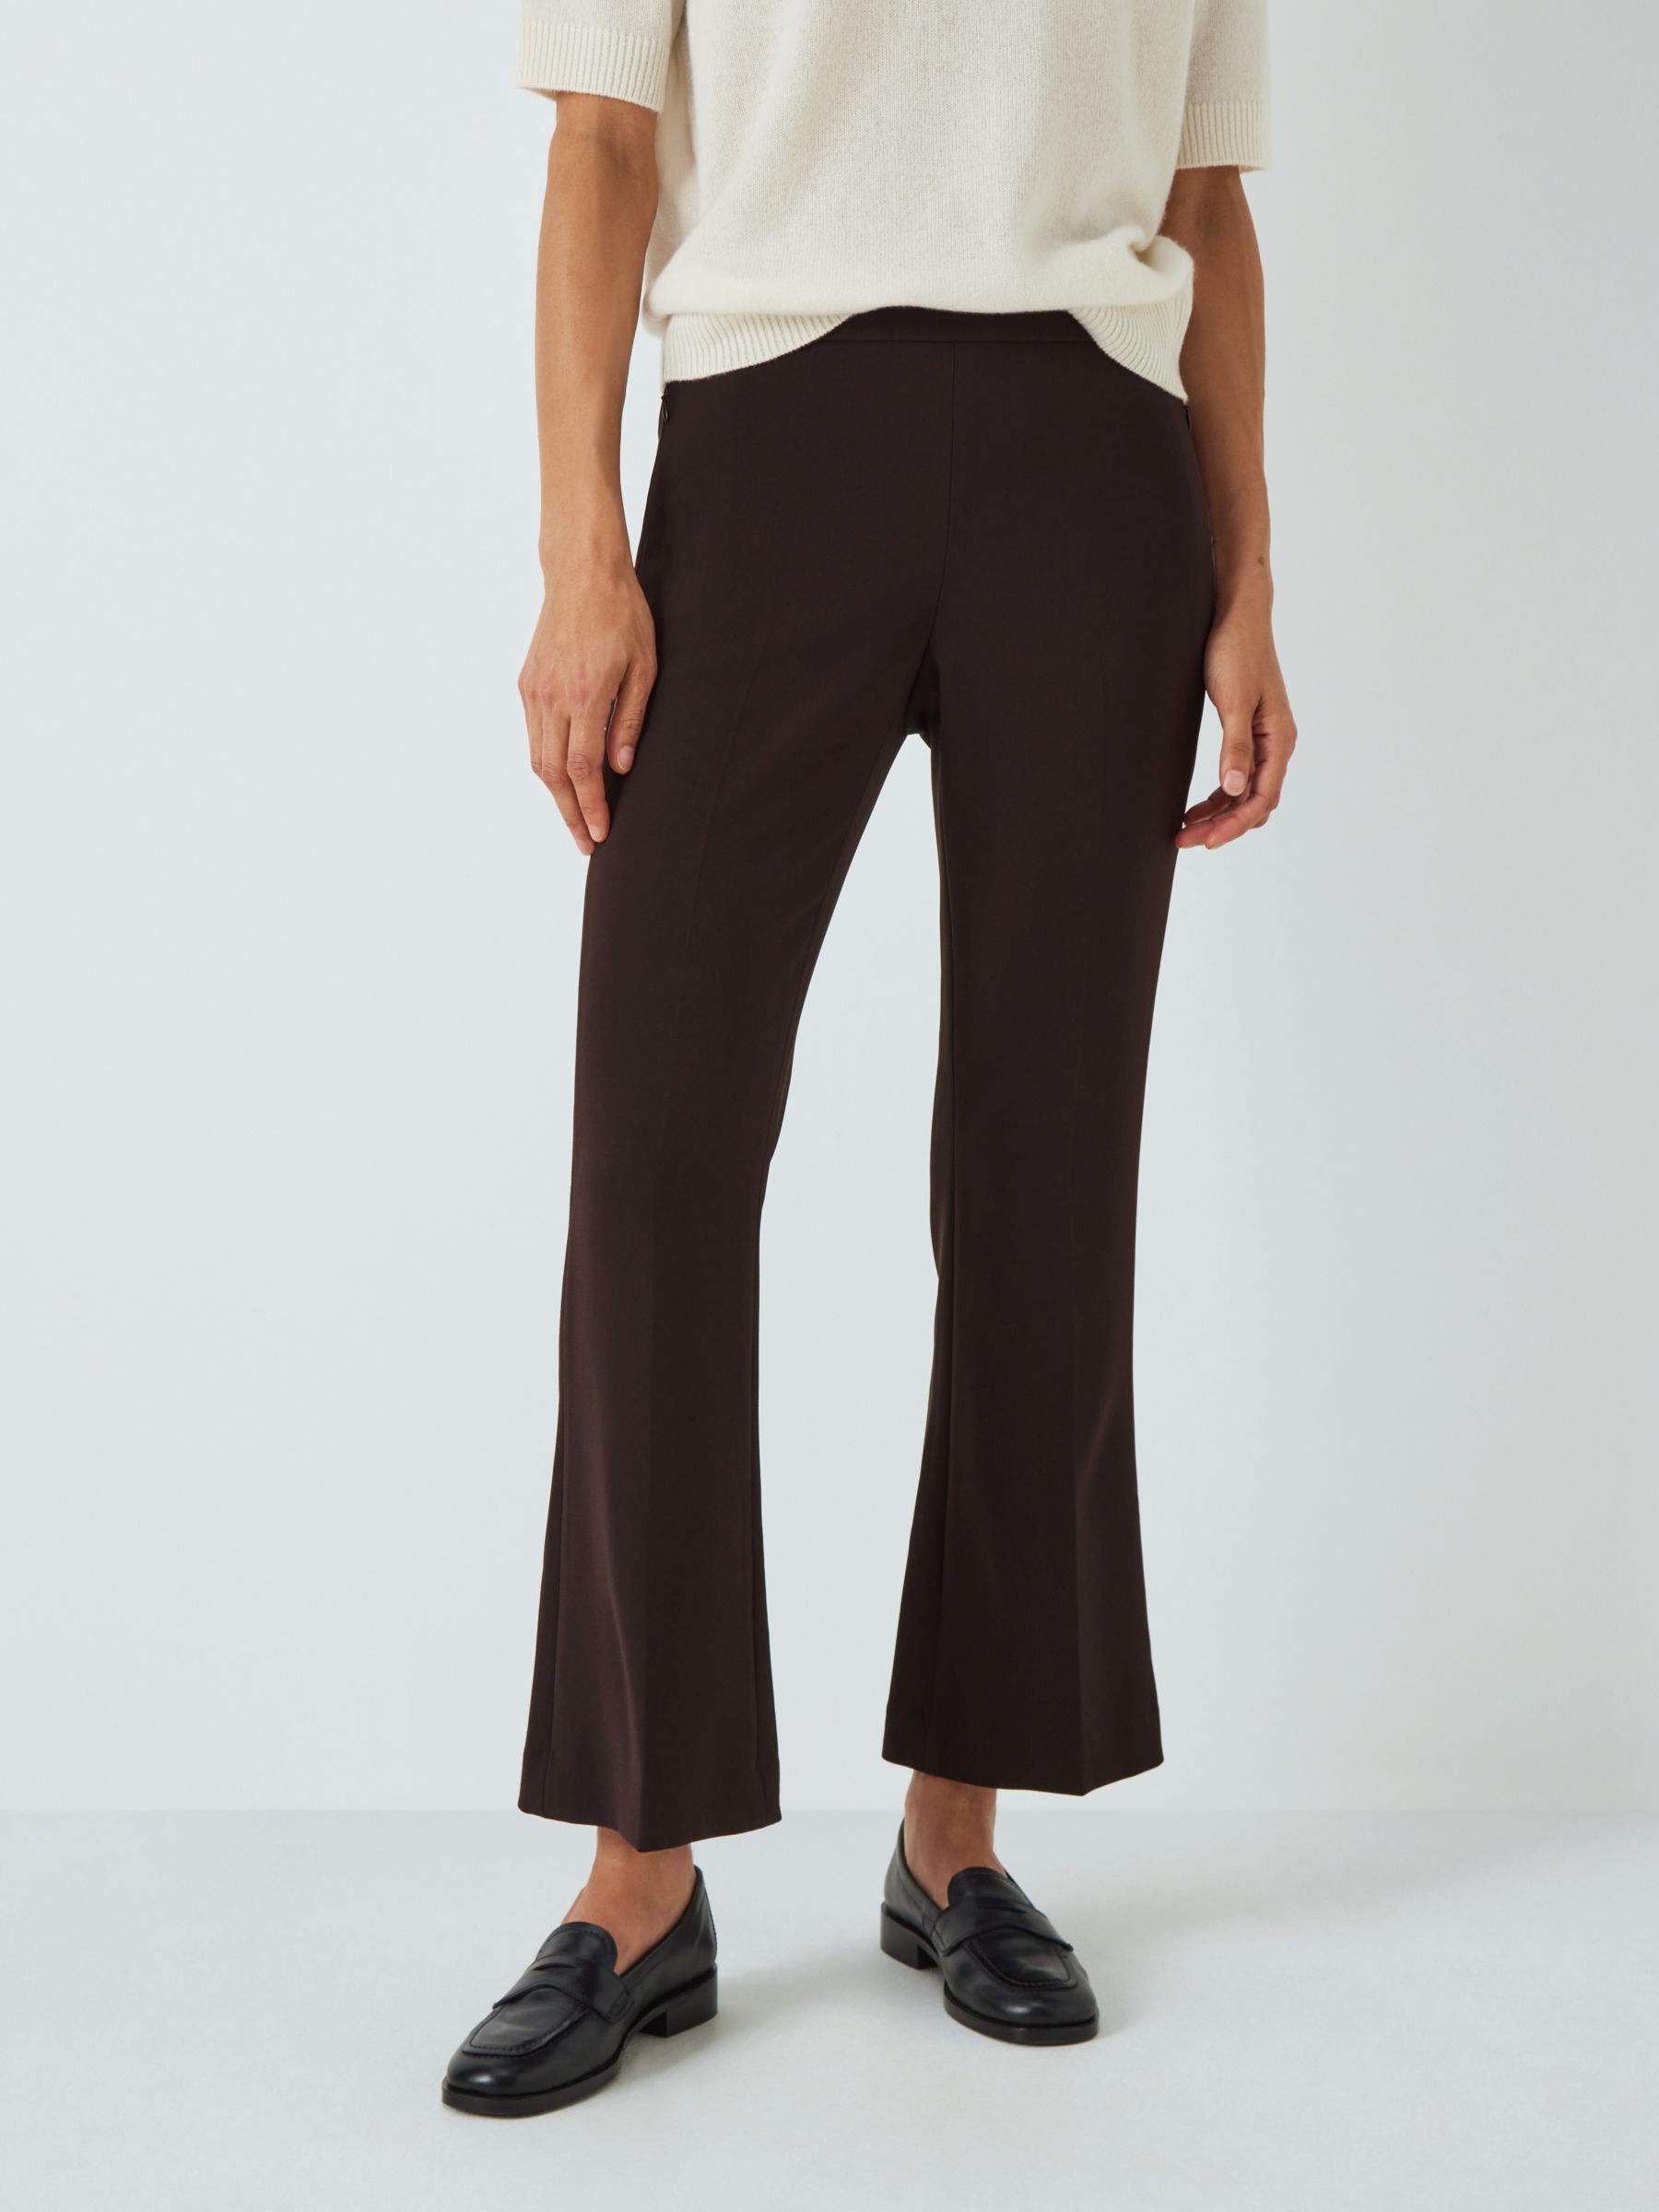 Theory Demitria Flared Trousers, Mink, 8